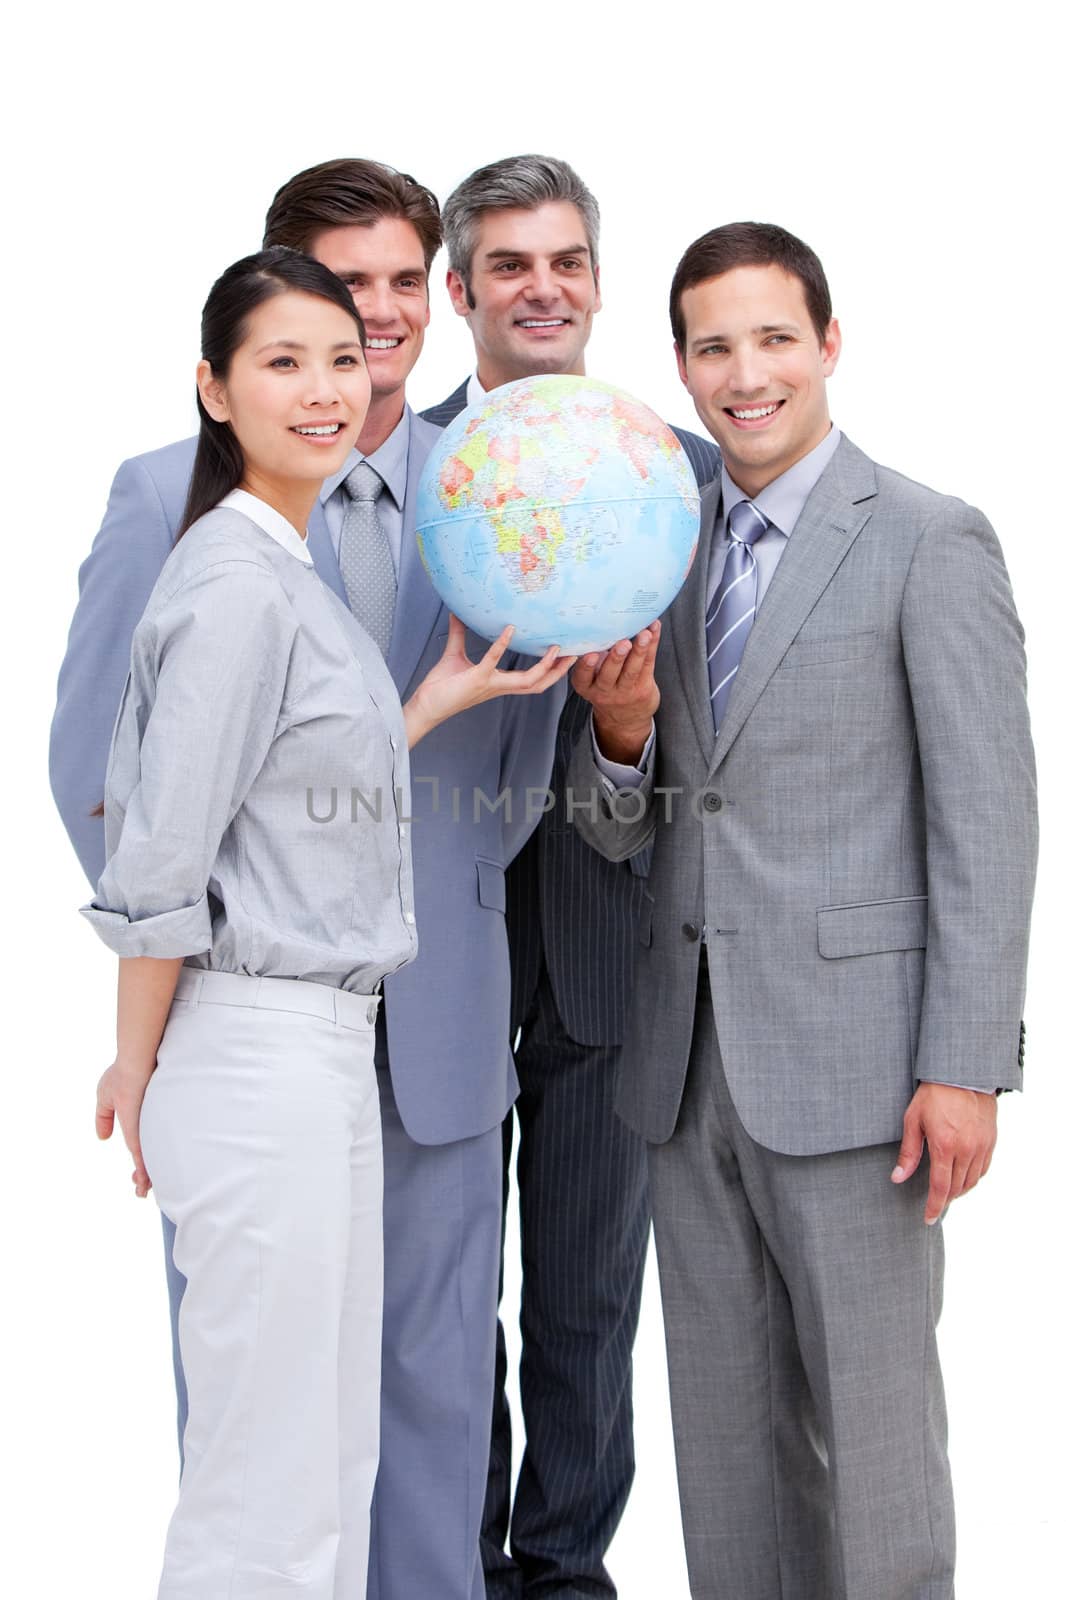 Successful businessteam looking at a terrestrial globe against a white background